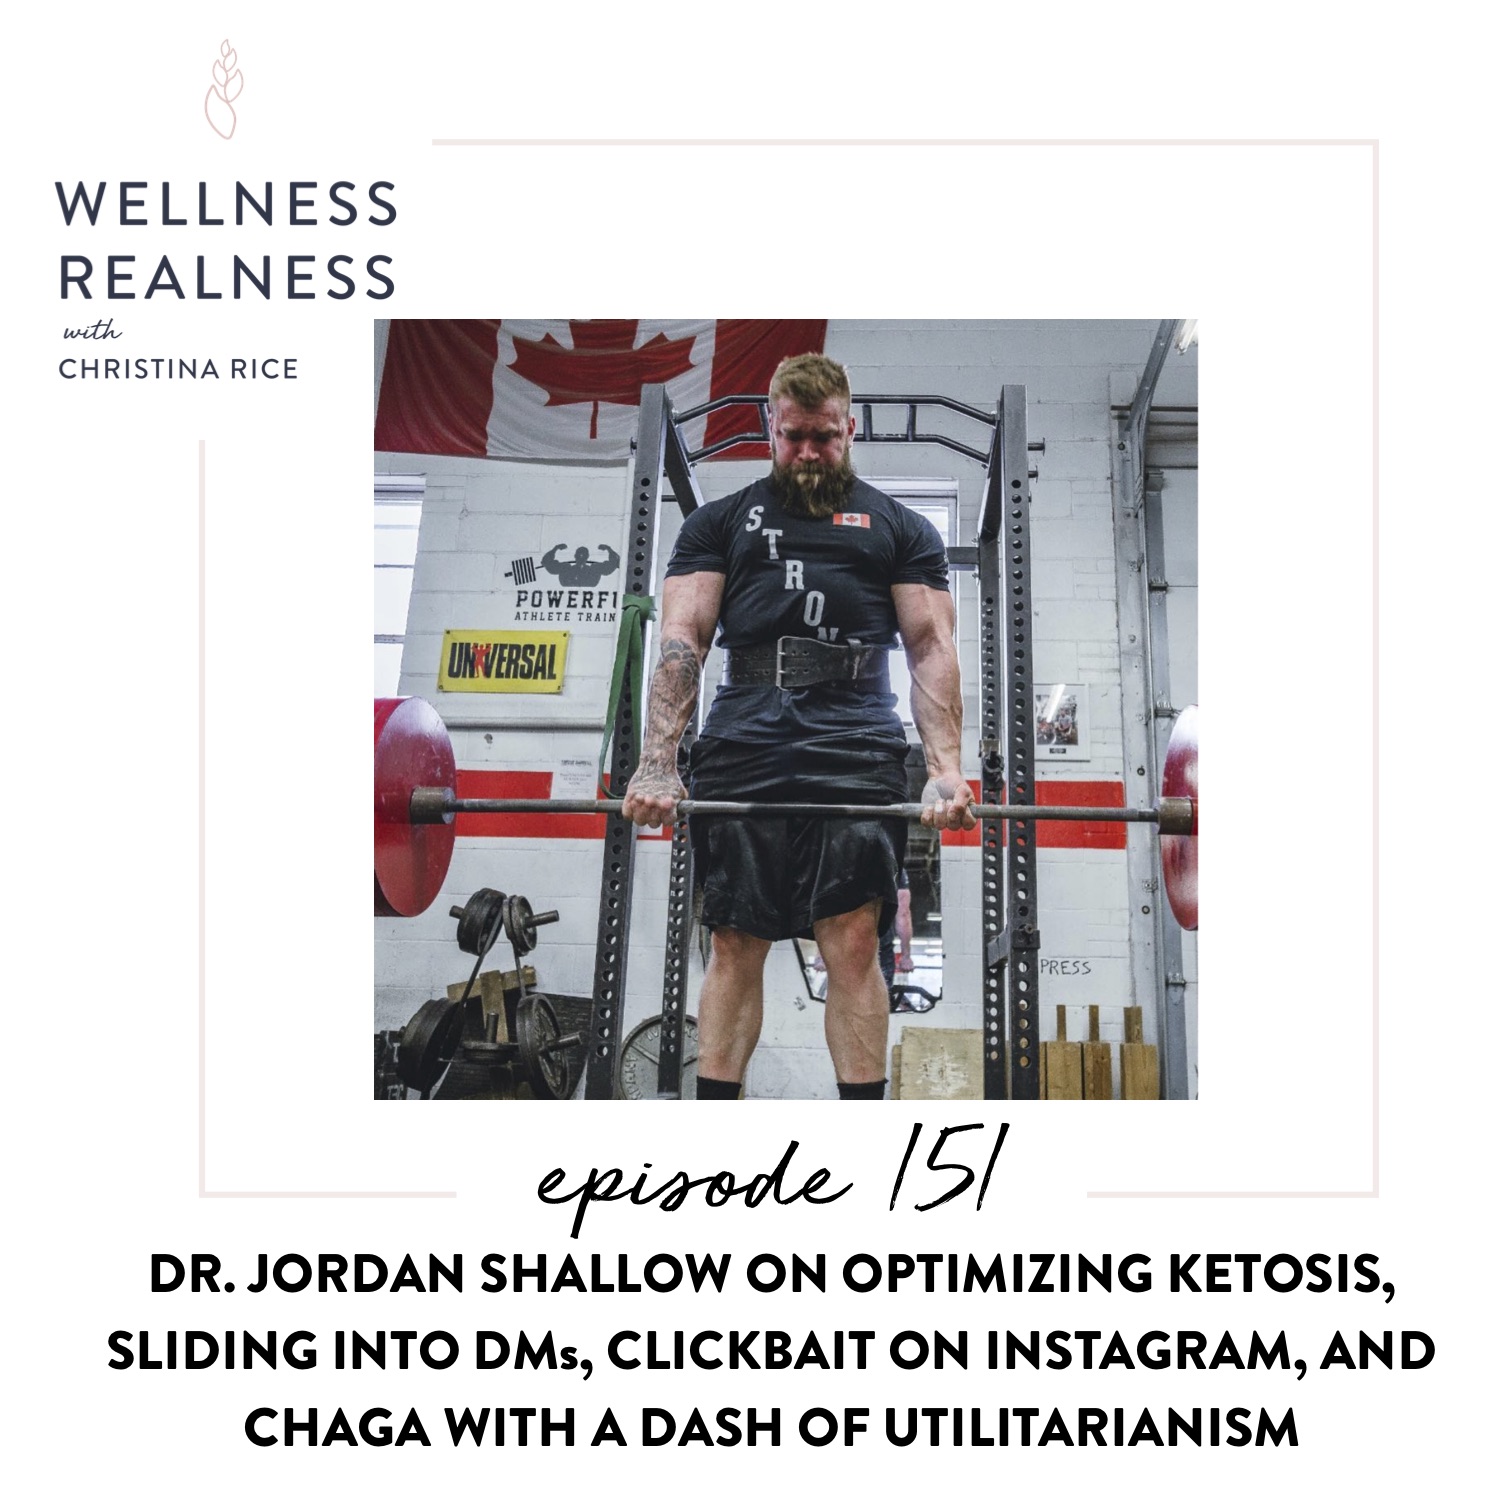 151: Dr. Jordan Shallow on Optimizing Ketosis, Sliding into DMs, Clickbait on Instagram, and Chaga with a Dash of Utilitarianism